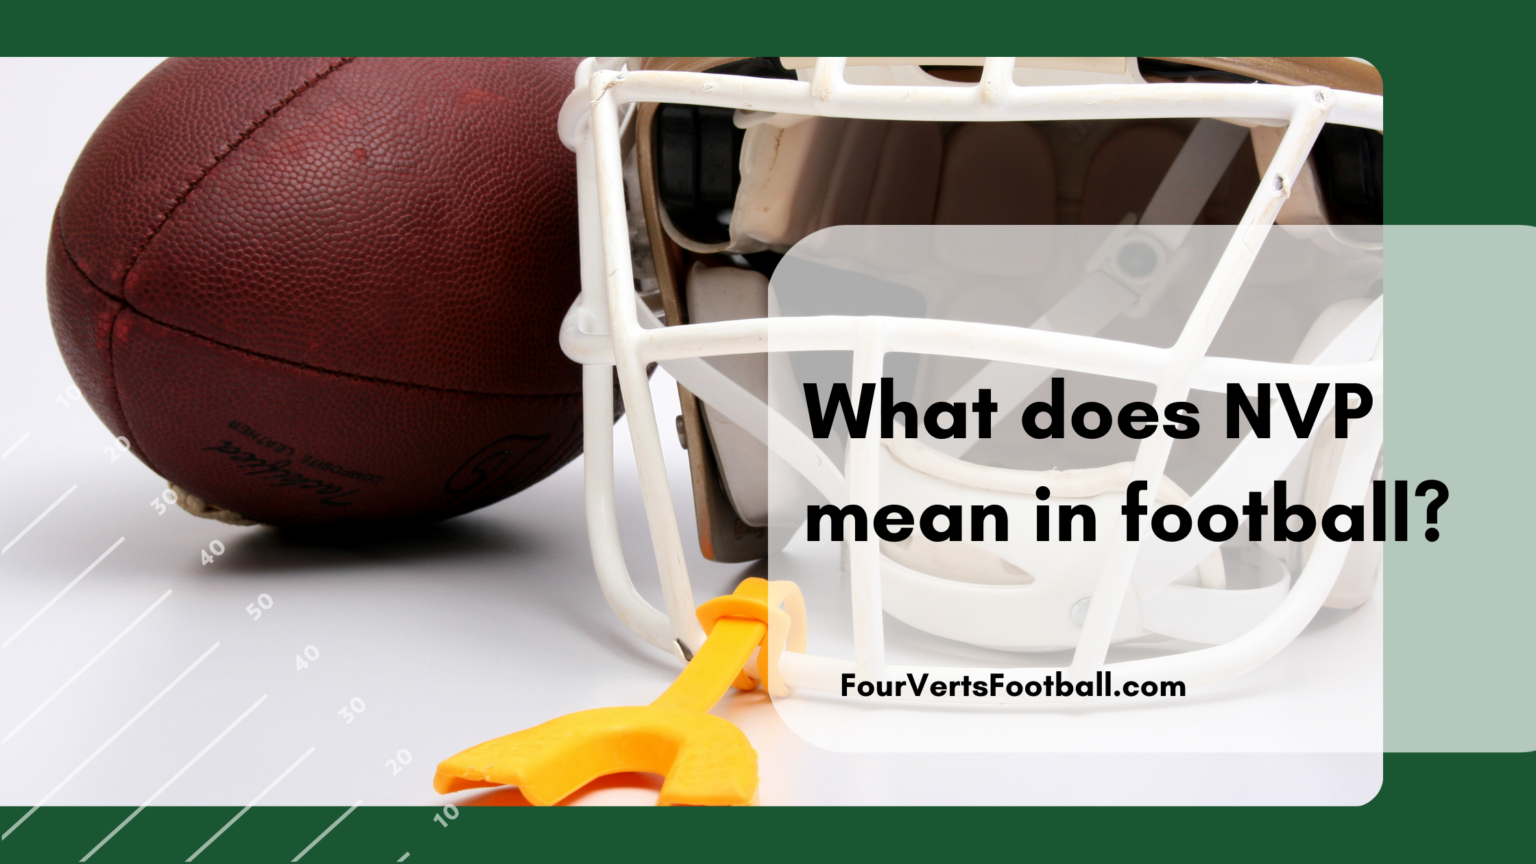 What does NVP mean in football? Four Verts Football